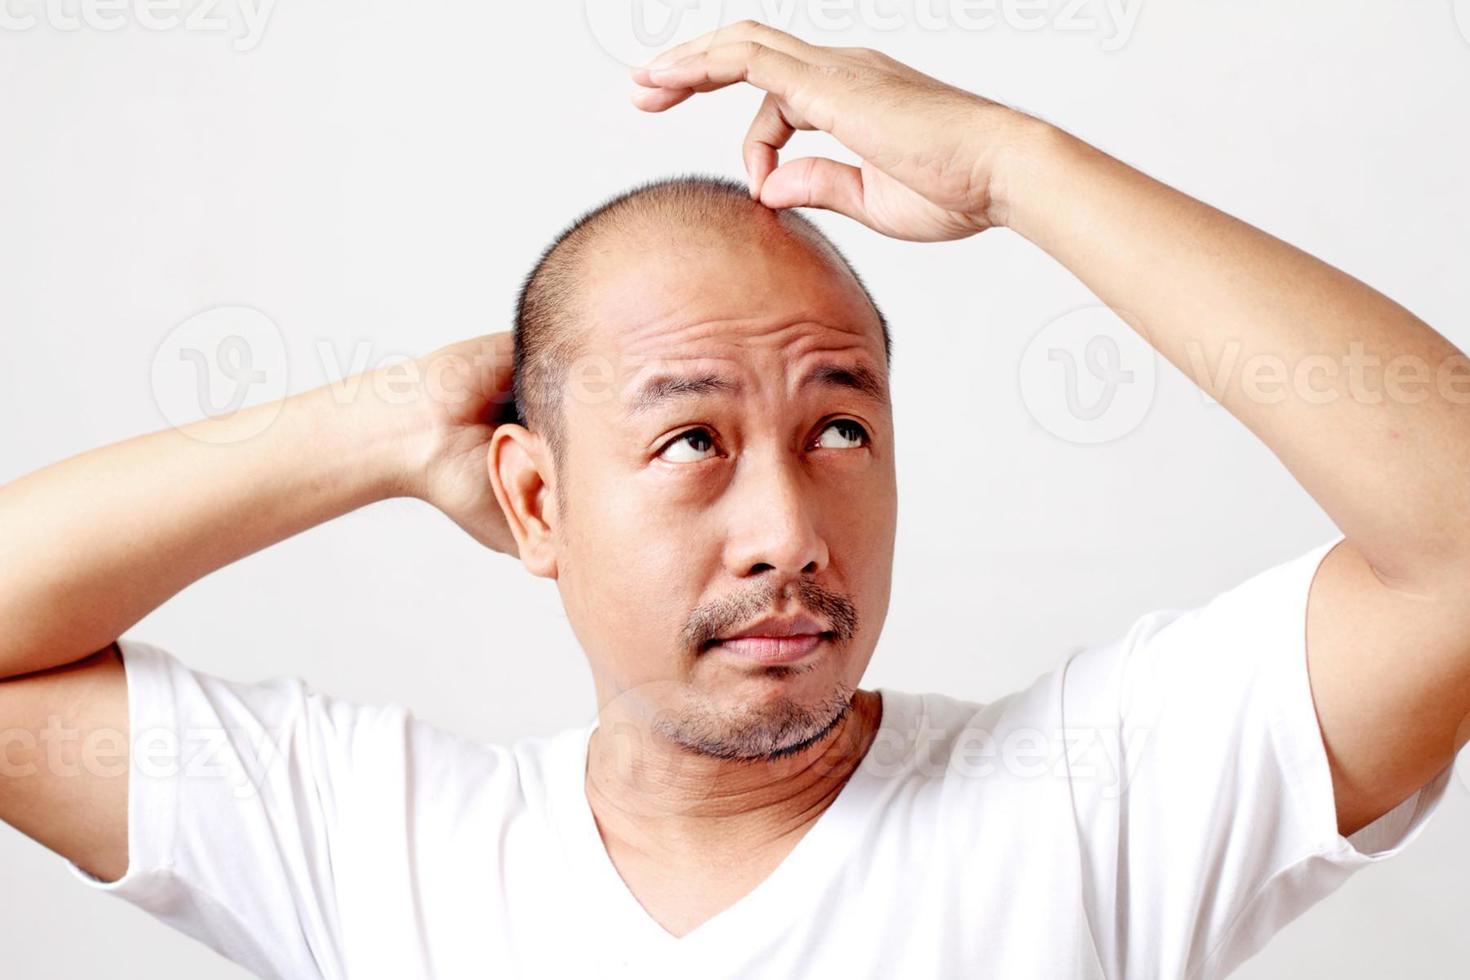 Bald man looking up holding head and clutching hair strand photo